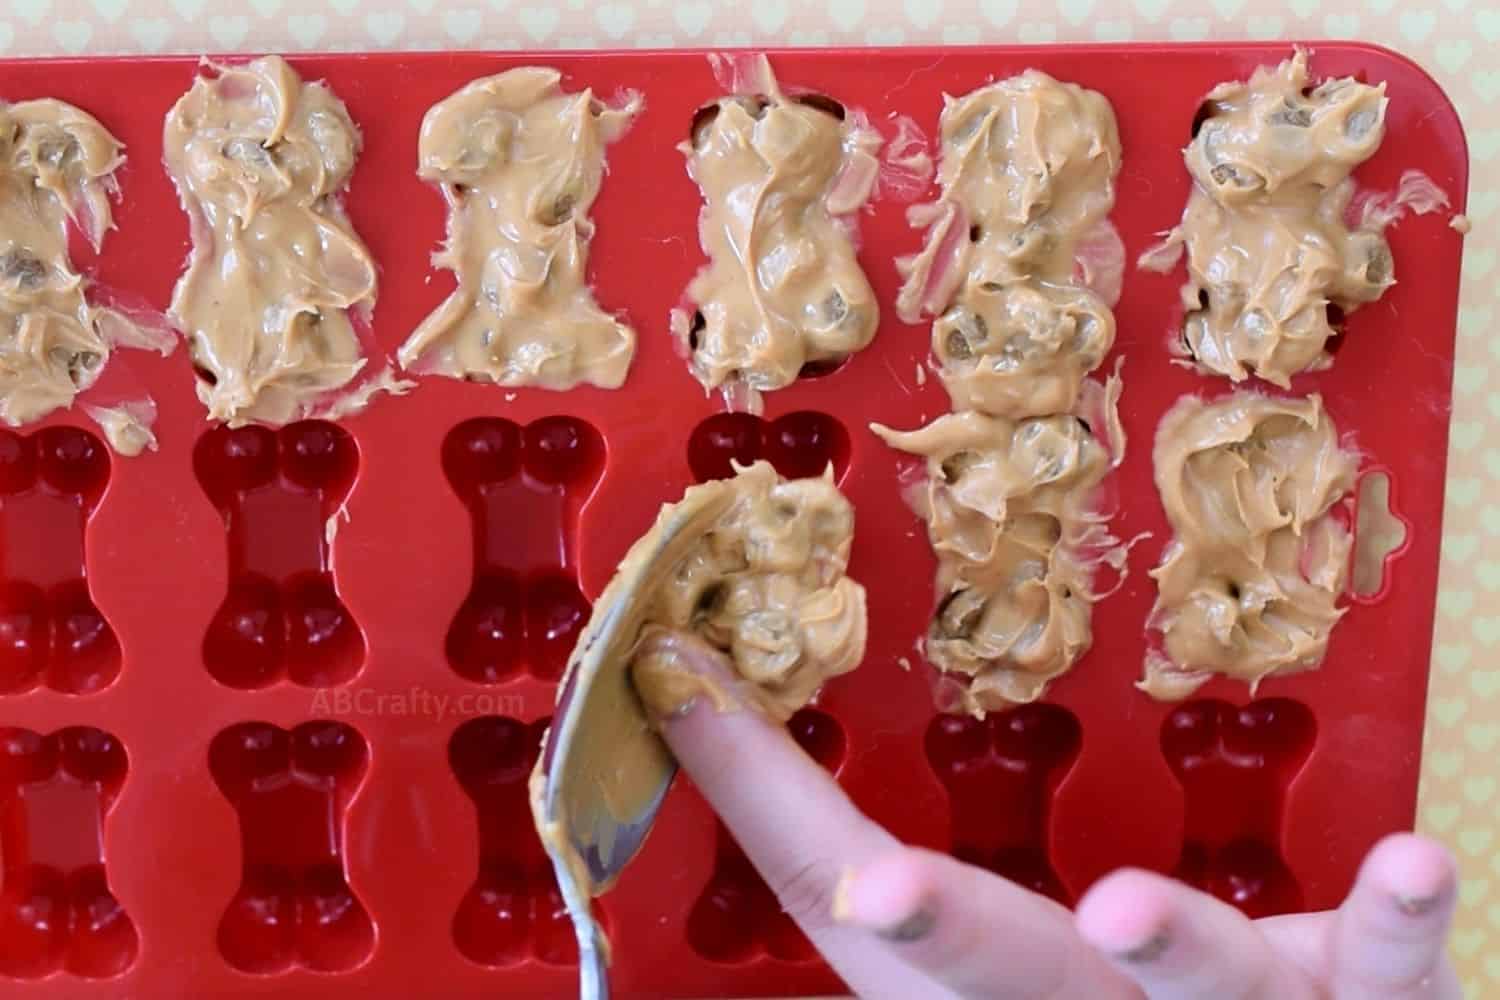 Using finger to scrape the peanut butter and dog food kibble mixture into the dog bone silicone mold